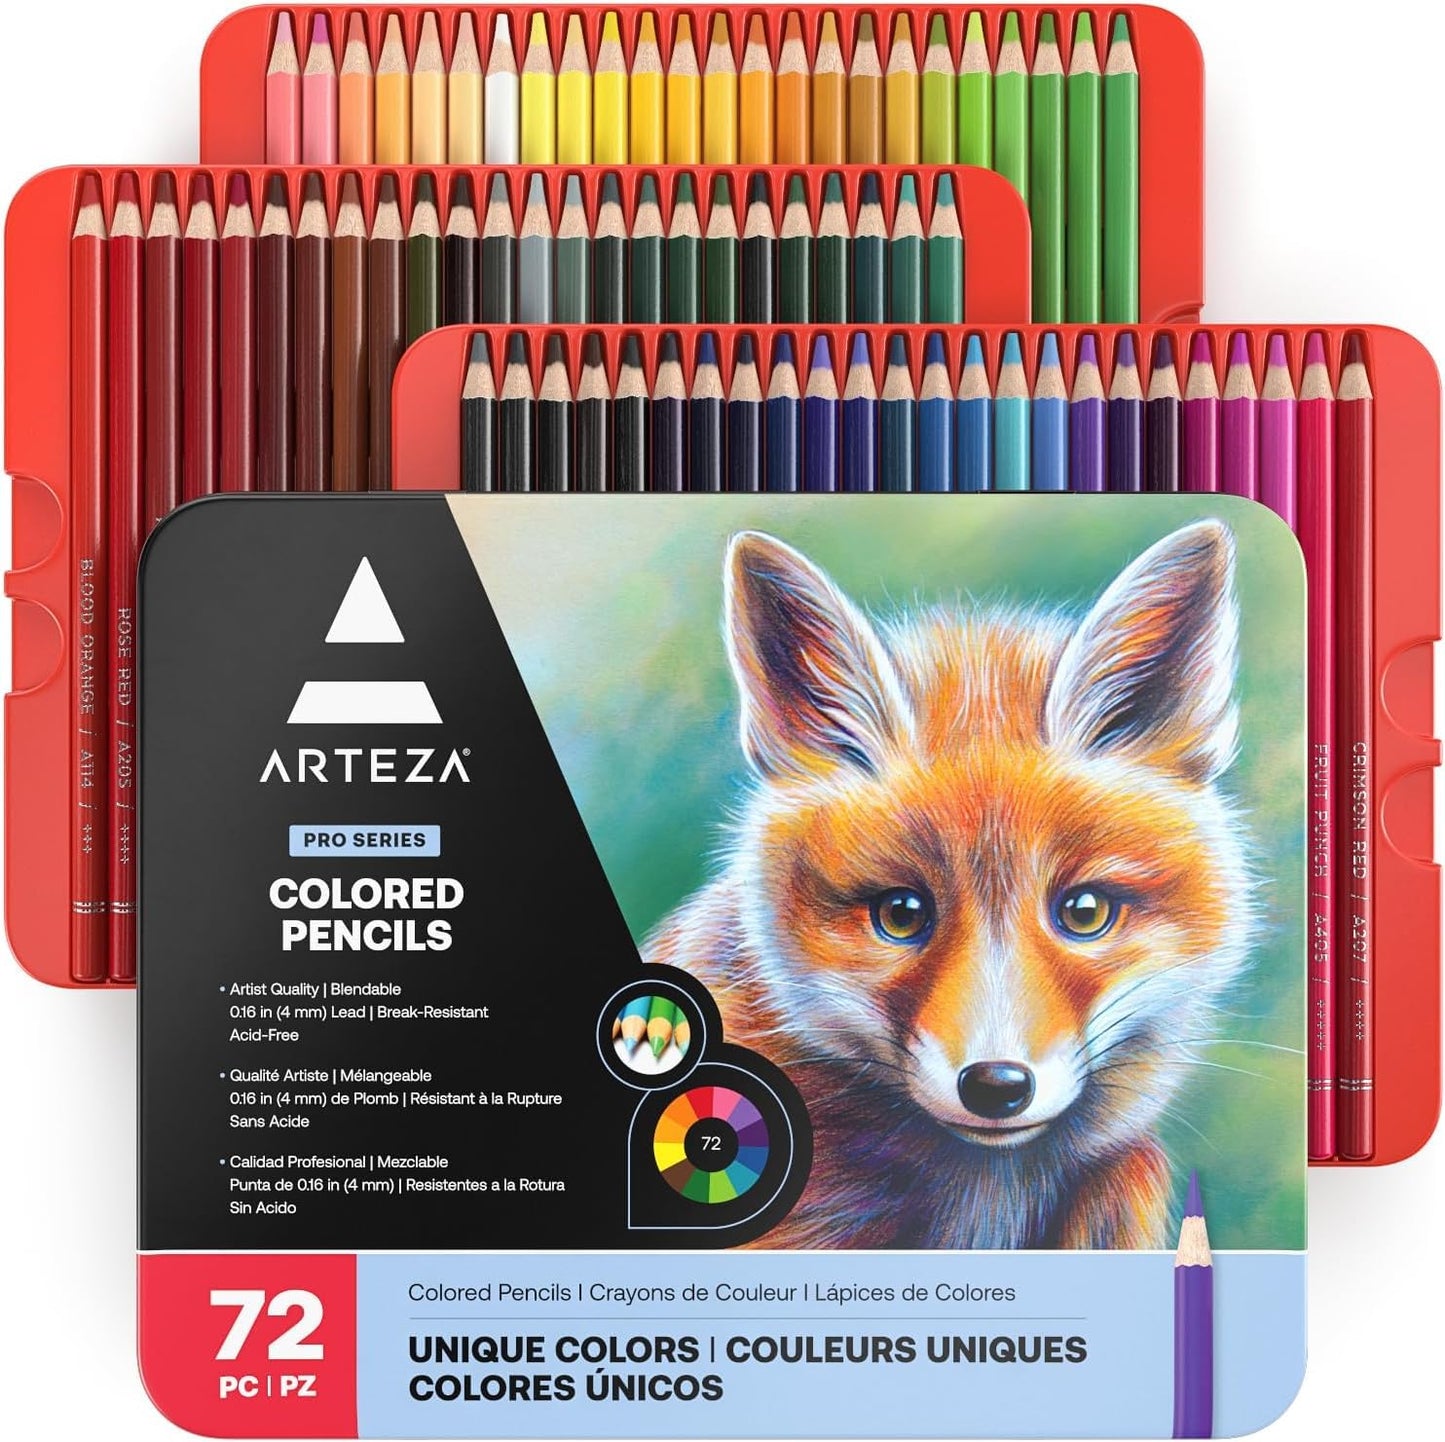 ARTEZA Colored Pencils for Adult Coloring, 72 Drawing Pencils with Soft Wax-Based Cores, Professional Art Supplies, Vibrant Pencil Set in Tin for